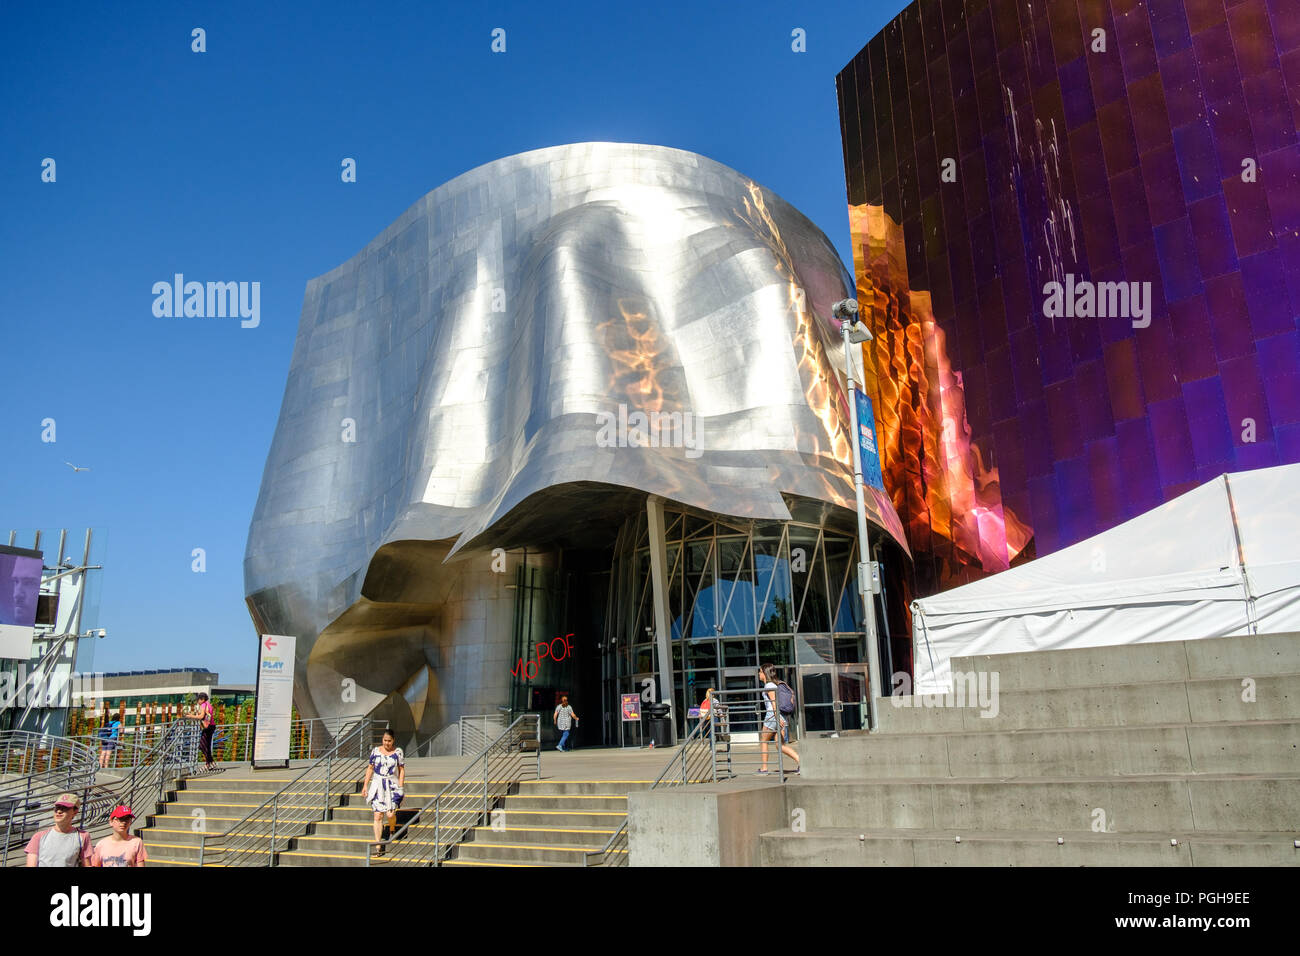 EMP Museum celebrating American popular music and culture, Seattle Center, seen through sculpture in Olympic Sculpture park, Seattle, USA Stock Photo